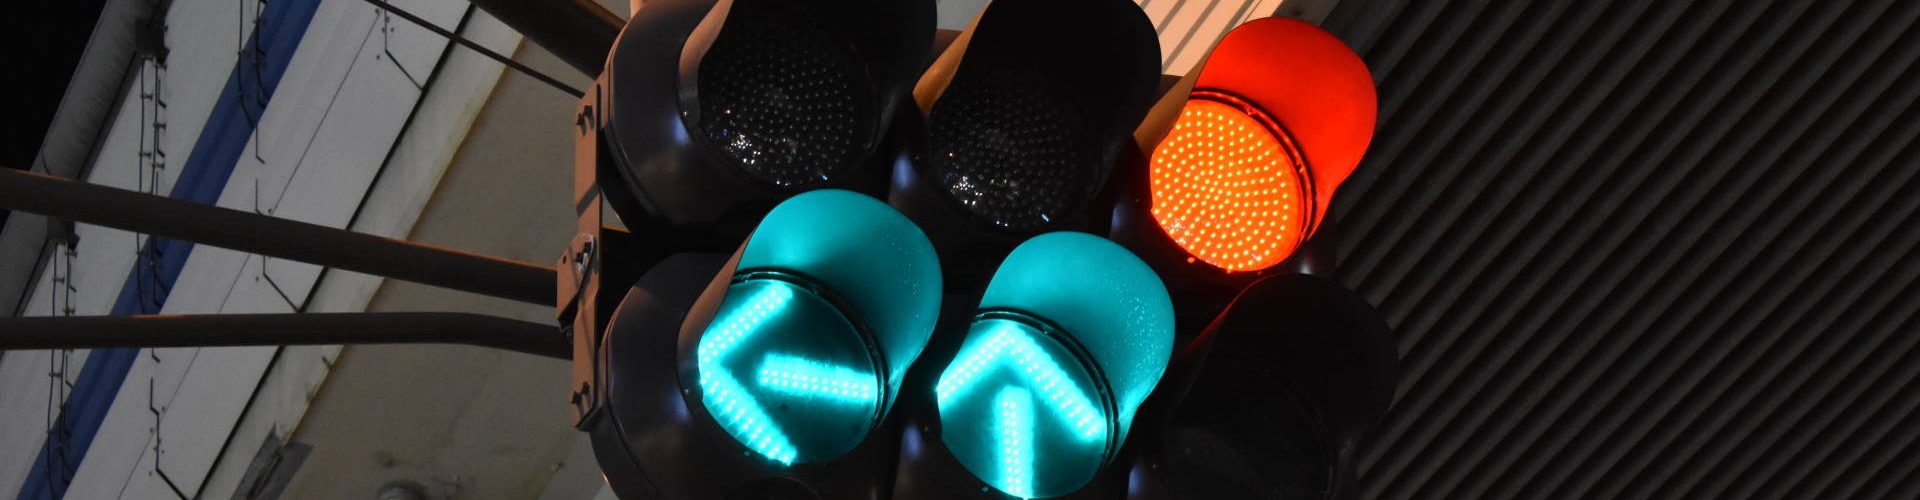 WHMCS alternative which one to chose traffic lights